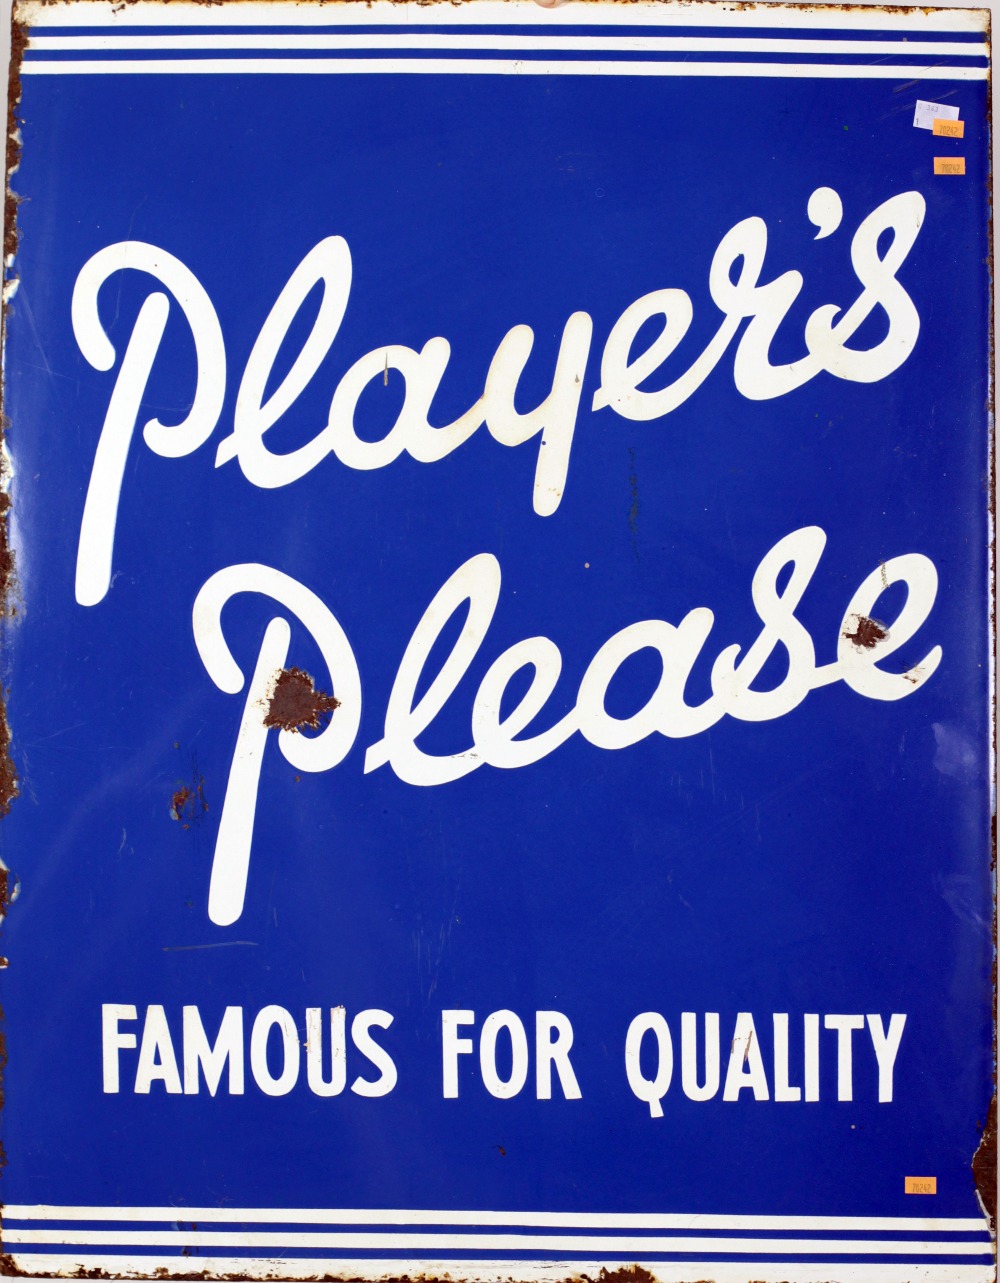 An early 20th Century enamel Shop Sign, "Players Please - Famous for Quality," approx.